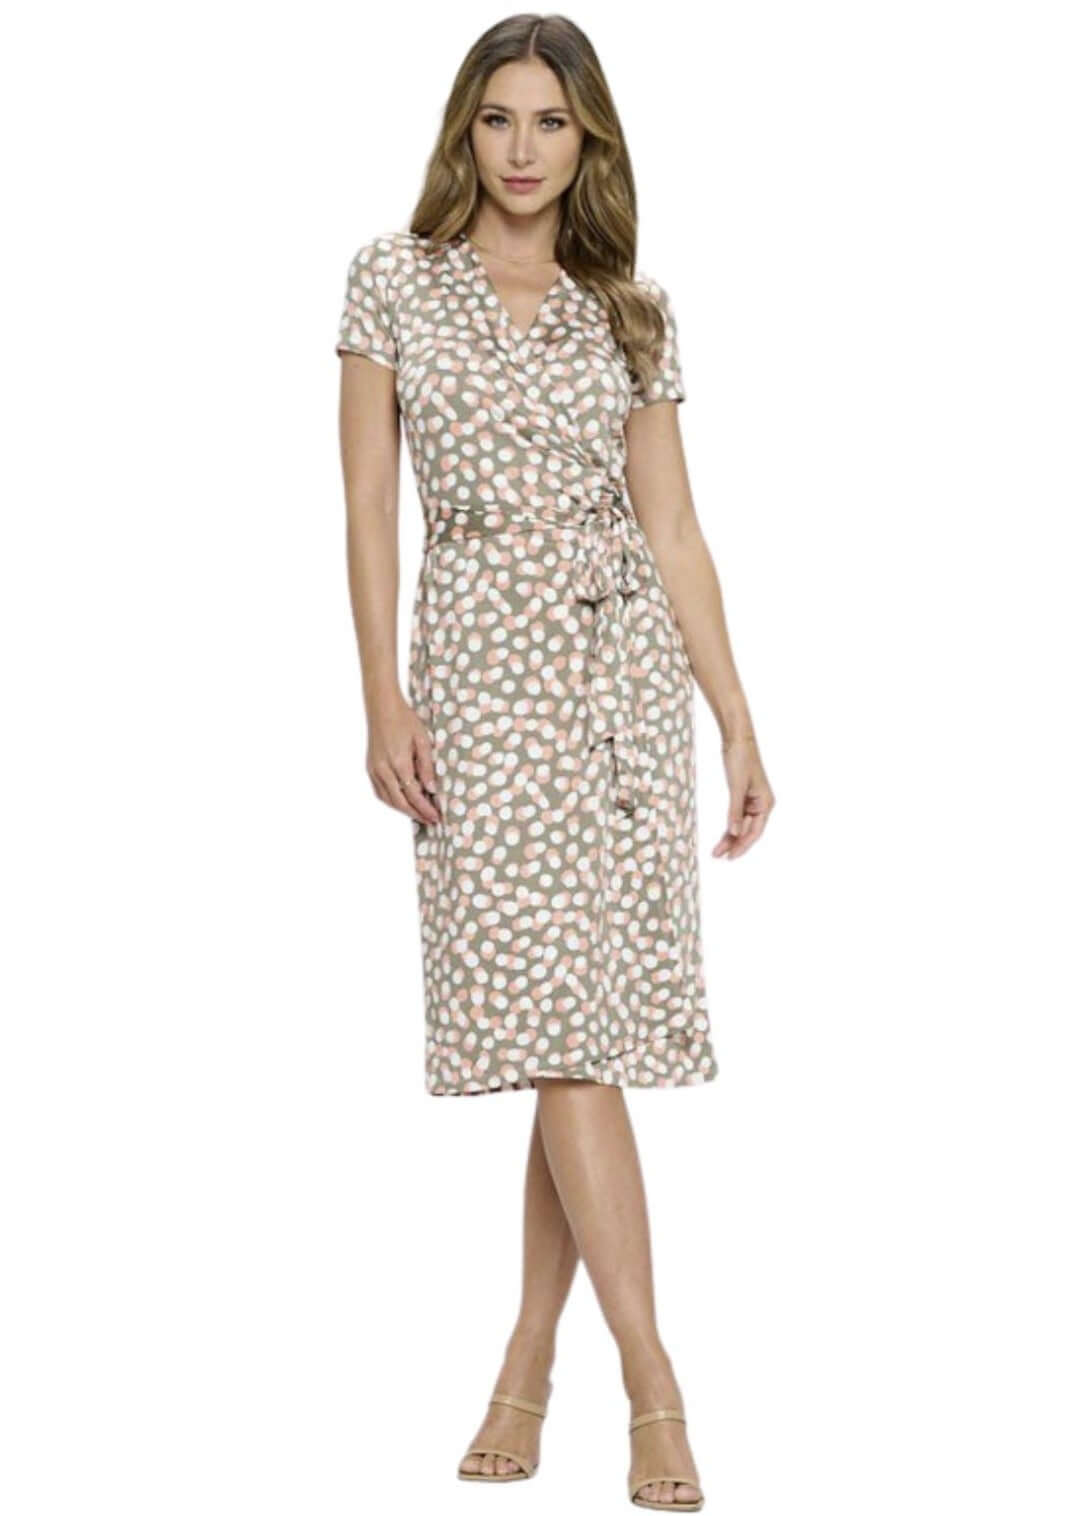 Ladies Taupe Polka Dot Print Midi Jersey Wrap Dress | Renee C. Style# S4329DRK | Made in USA | Classy Cozy Cool Women's Made in America Clothing Boutique